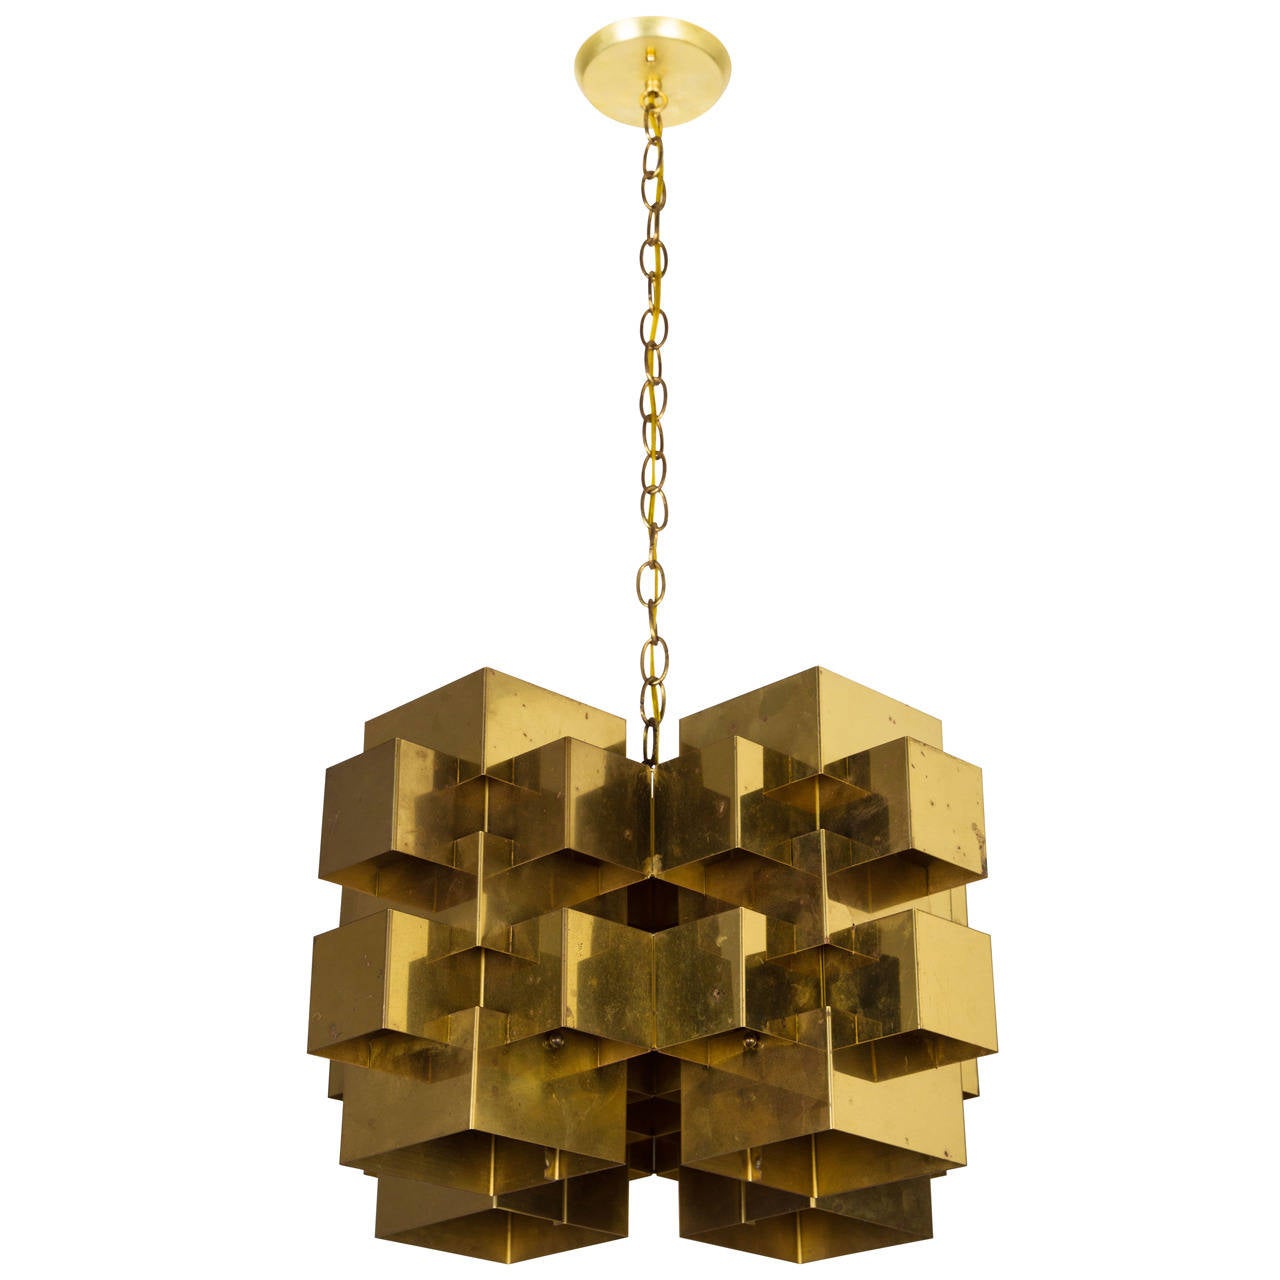 The most incredible pendant lights